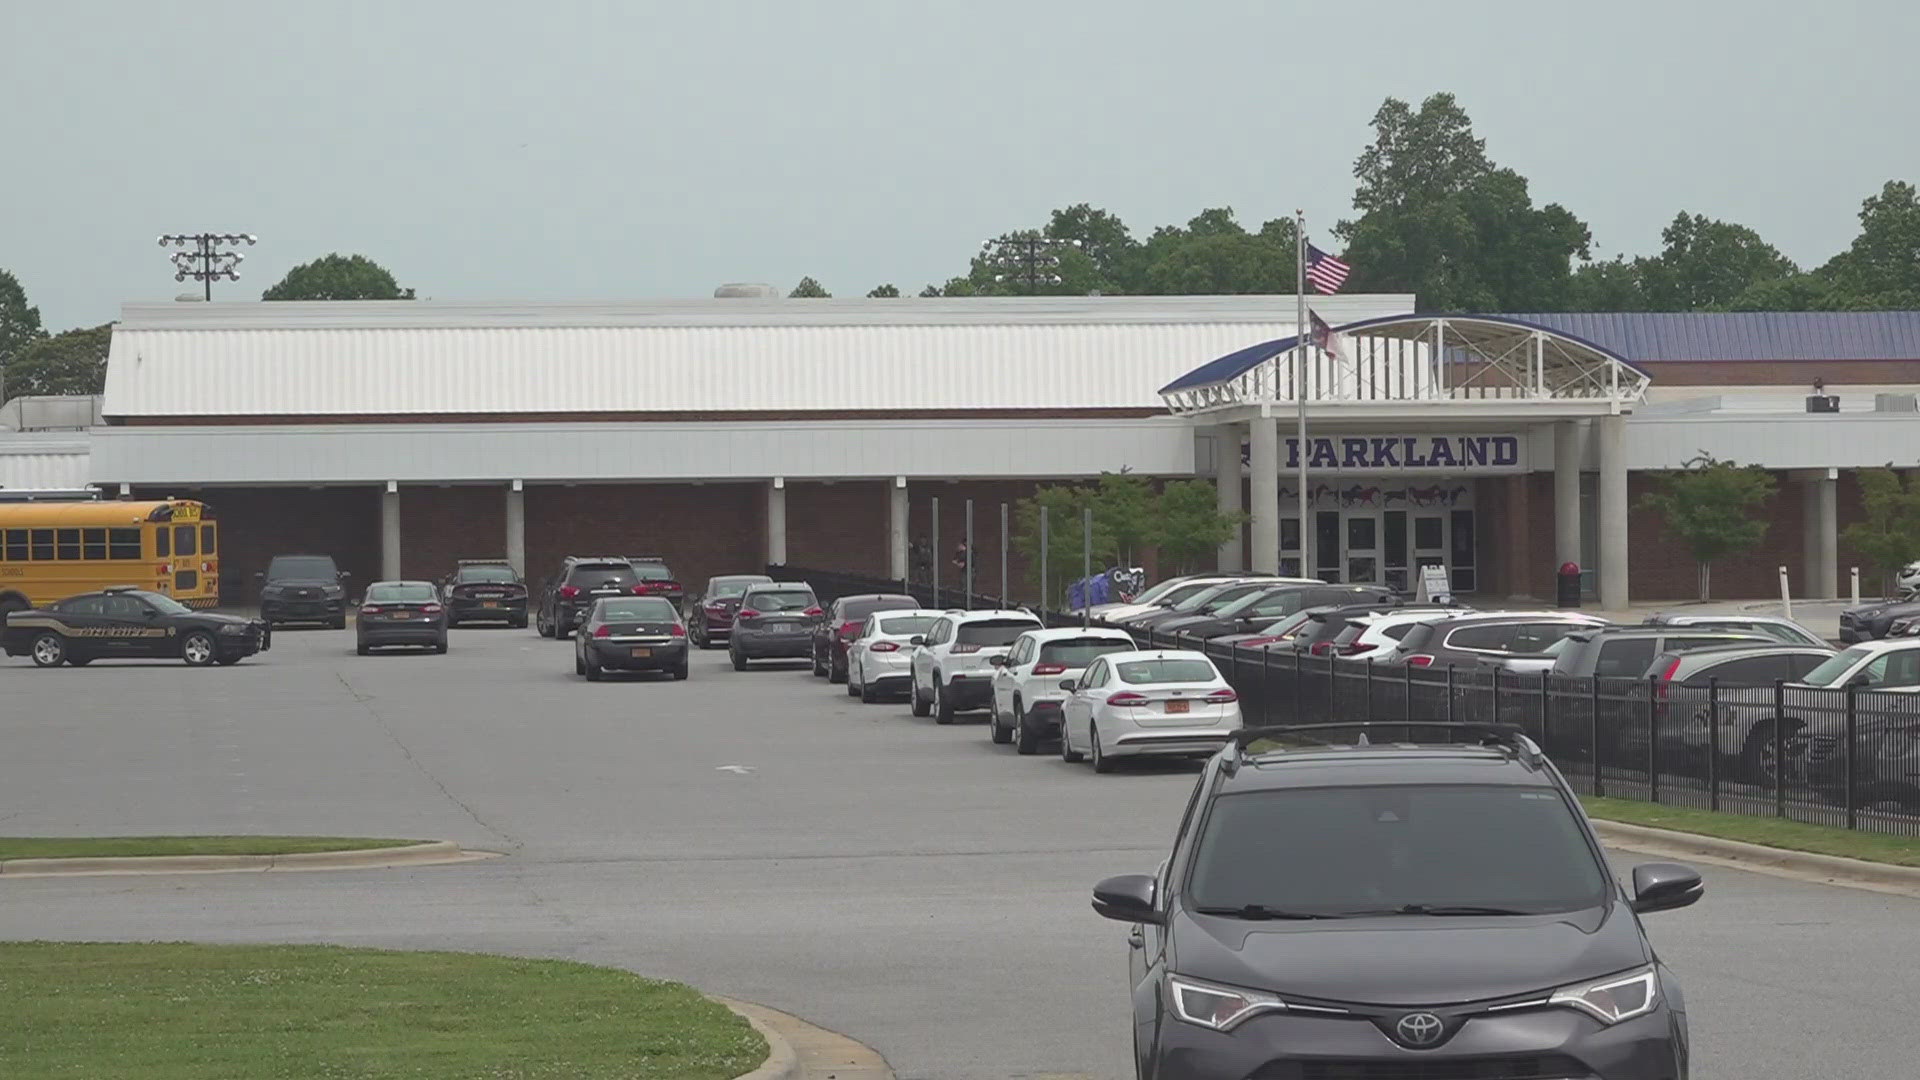 The school system is discussing security measures after several incidents at Parkland High school.